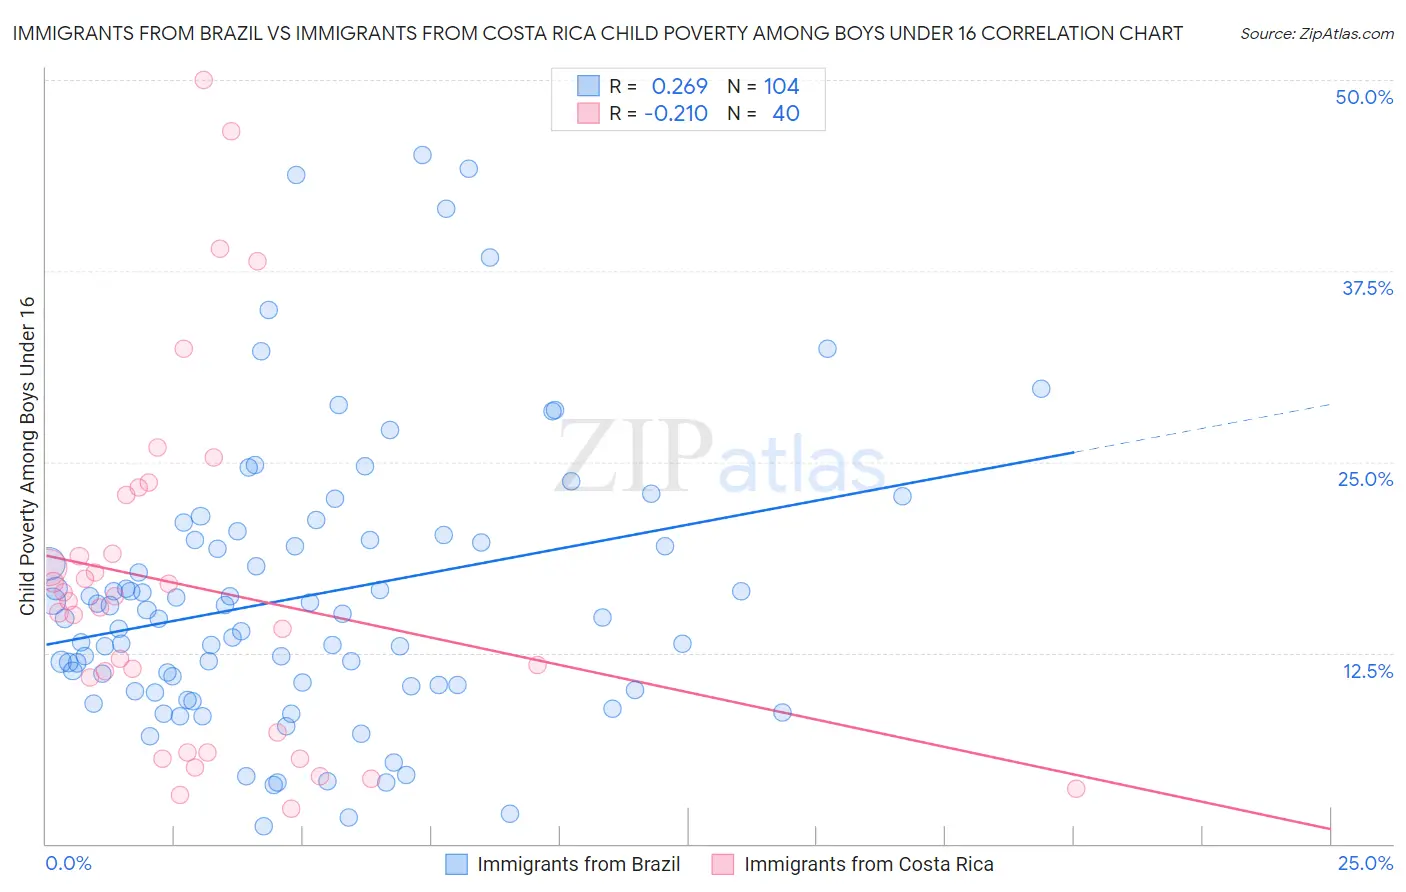 Immigrants from Brazil vs Immigrants from Costa Rica Child Poverty Among Boys Under 16